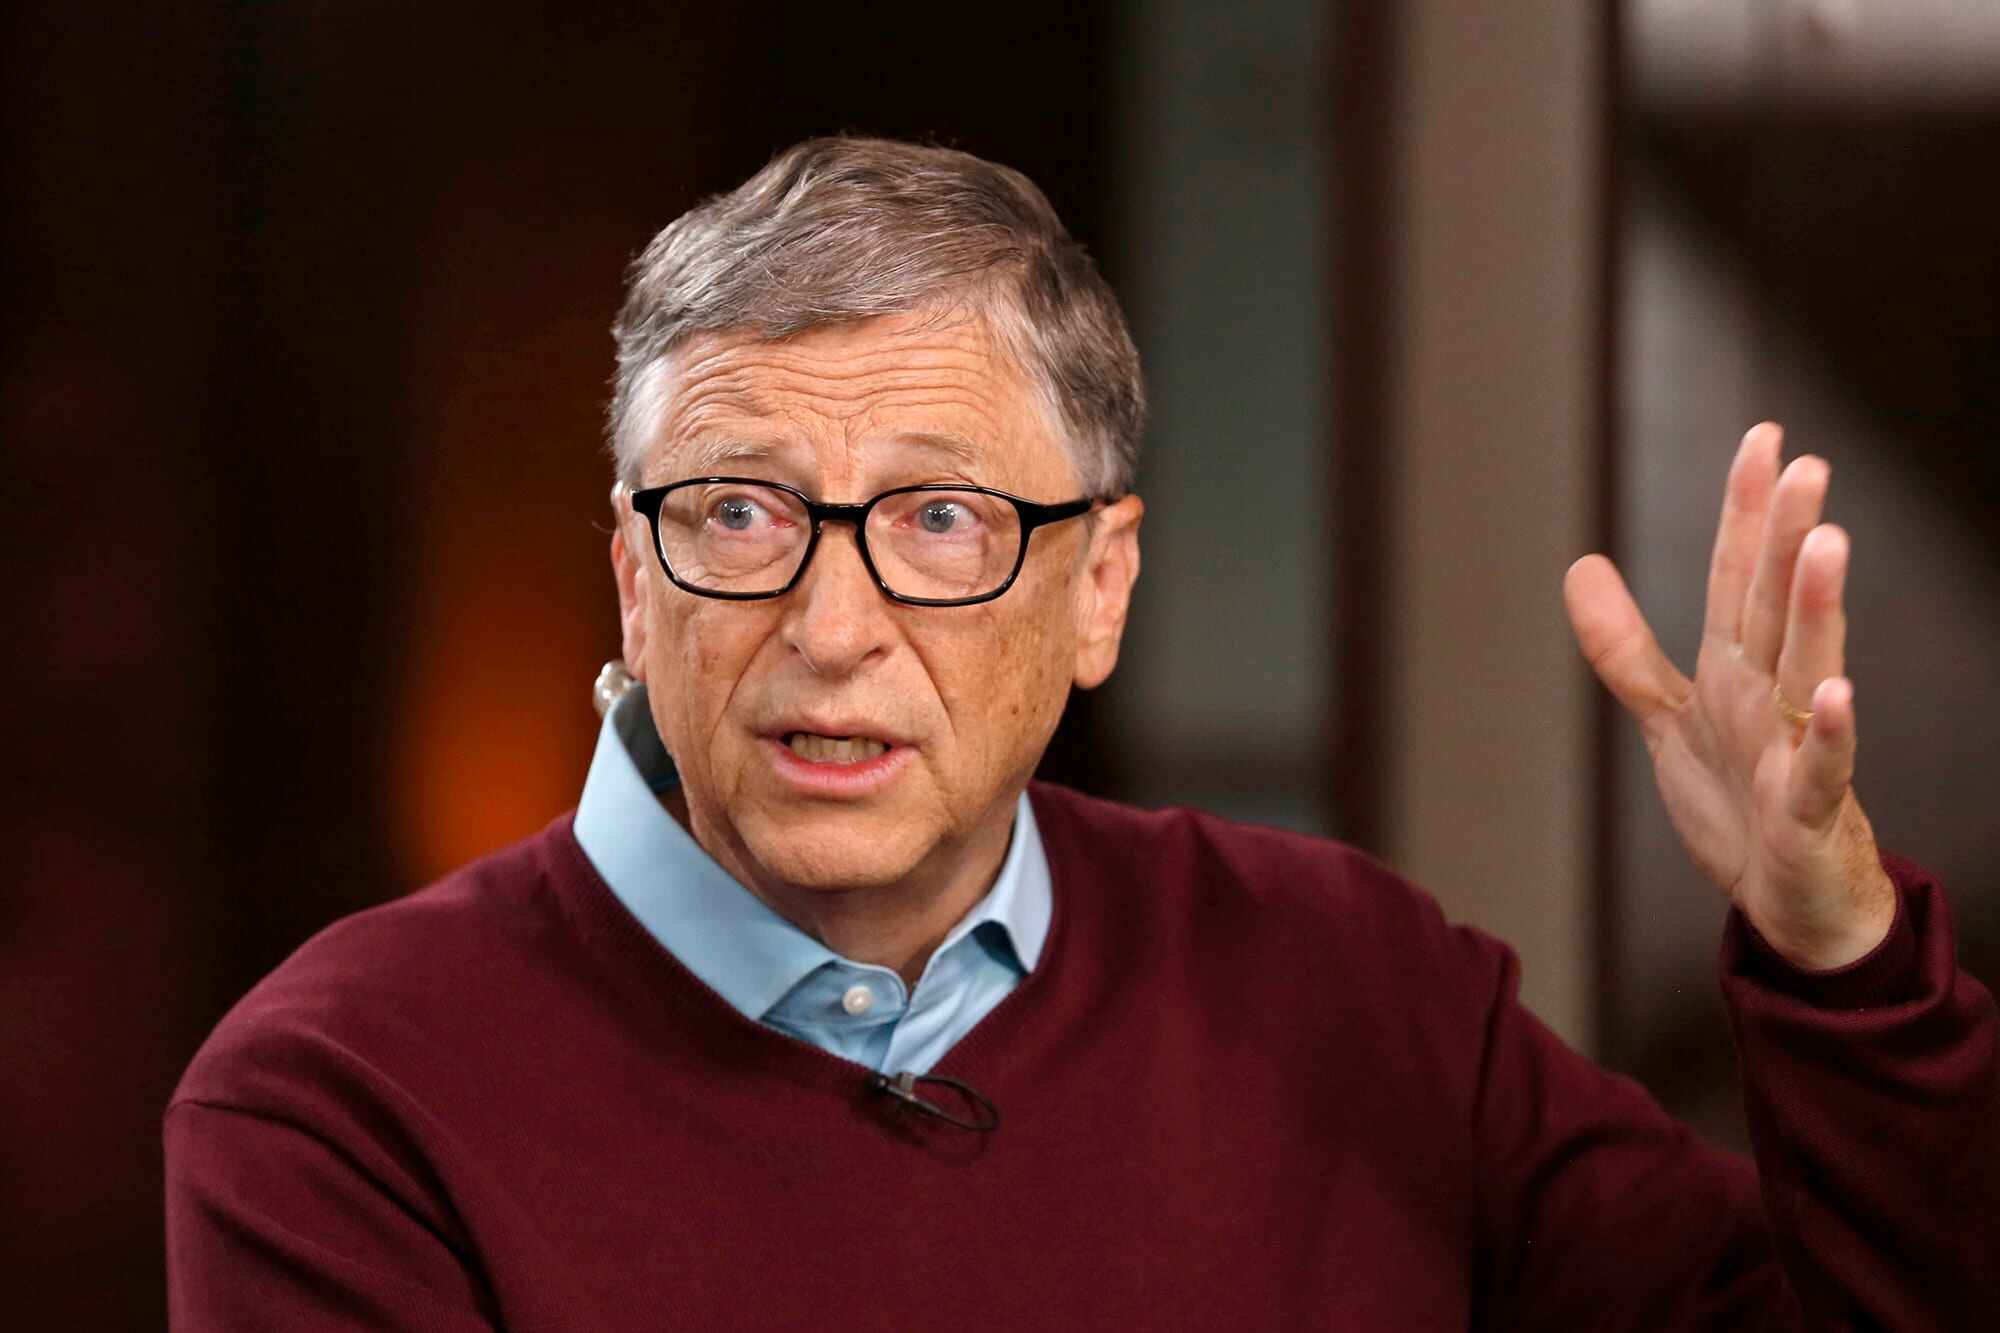 Bill Gates, founder of Microsoft and globally renowned philanthropist